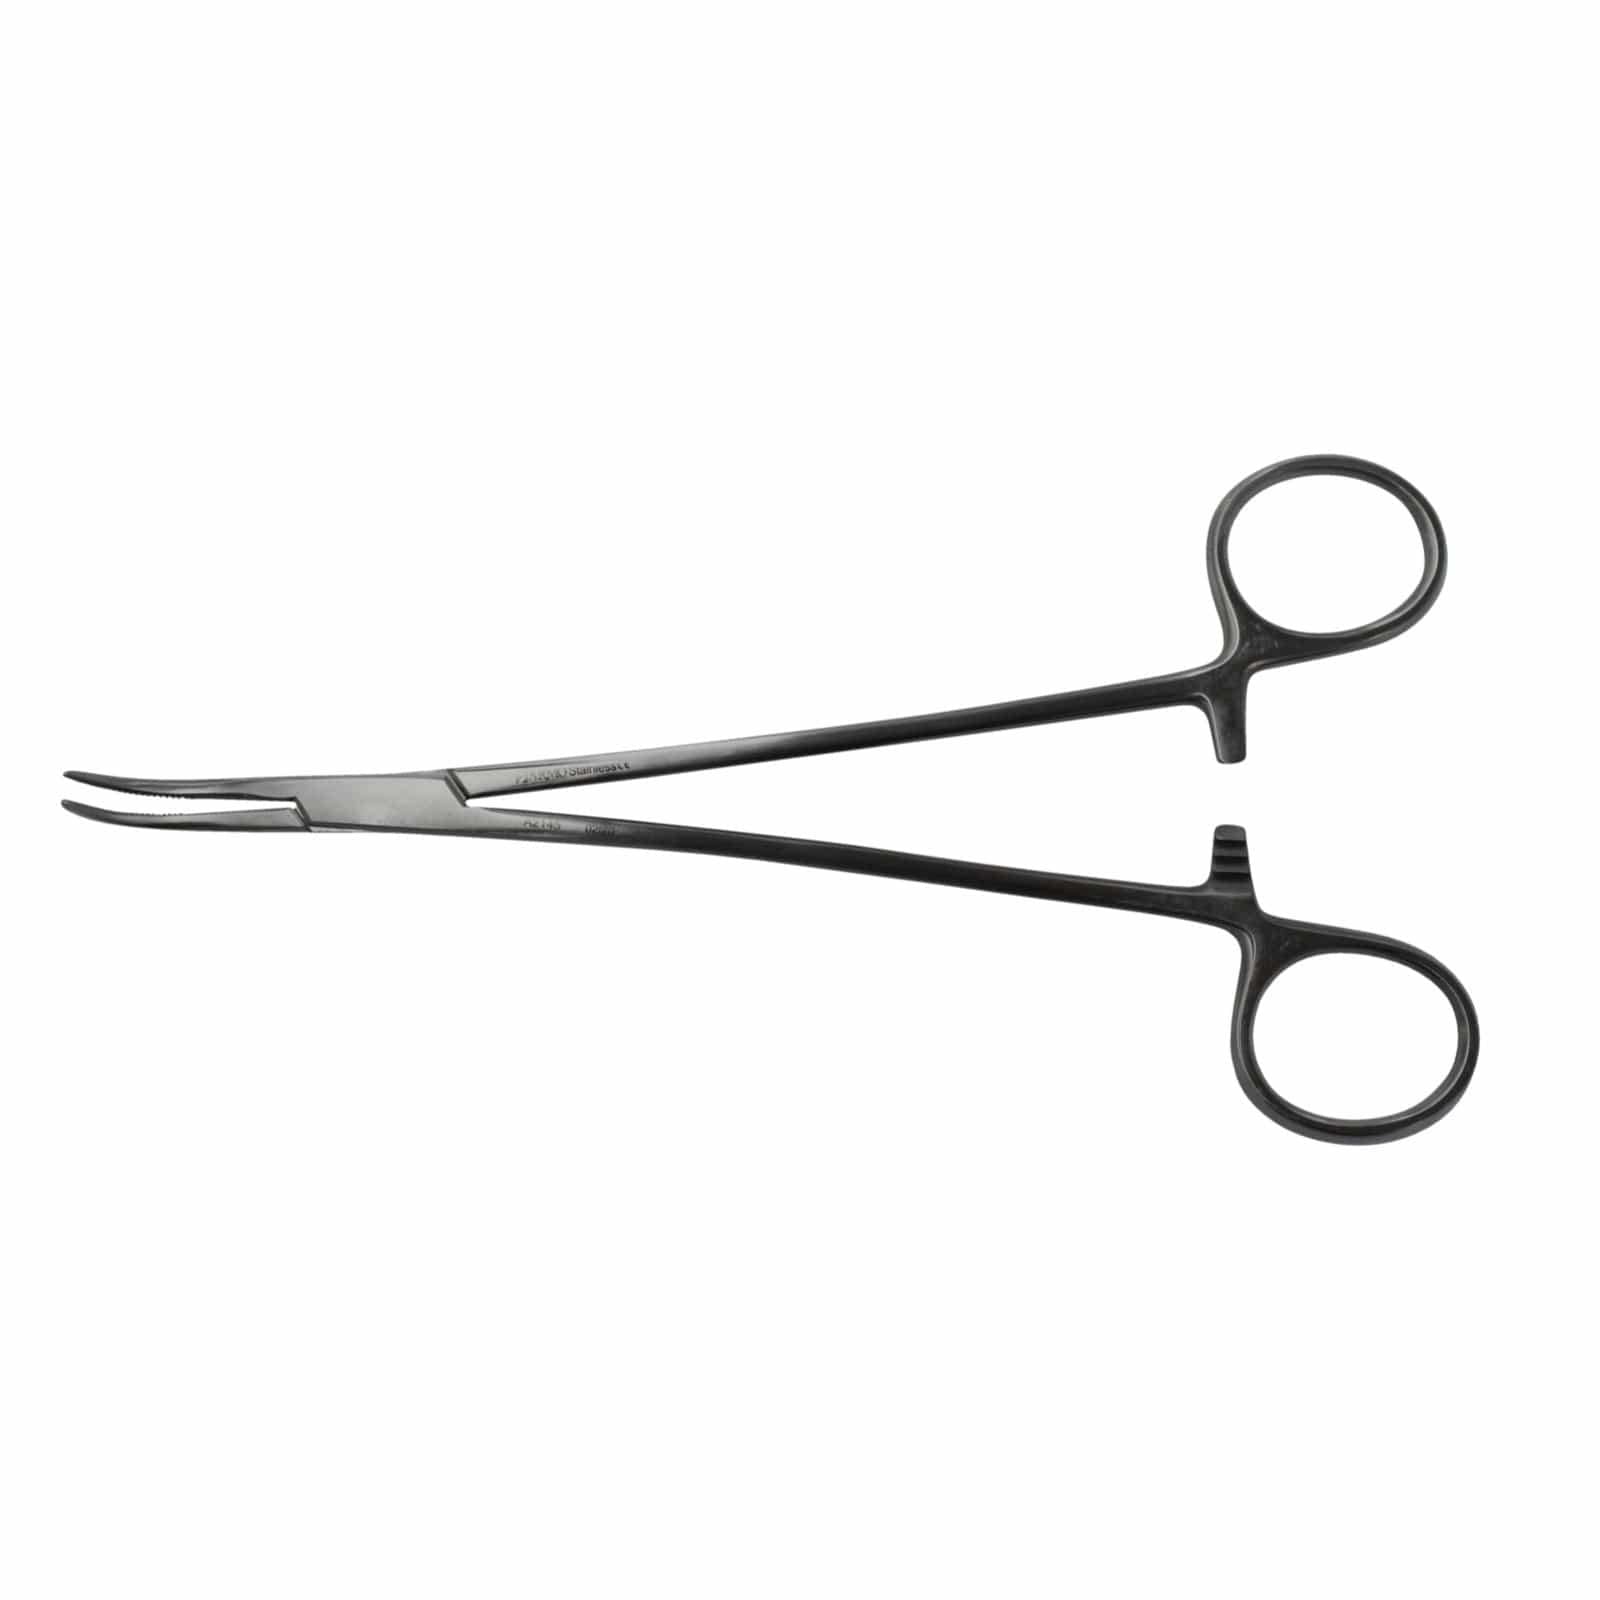 Armo Surgical Instruments 18cm / Curved / Baby Armo Mixter Artery Forceps